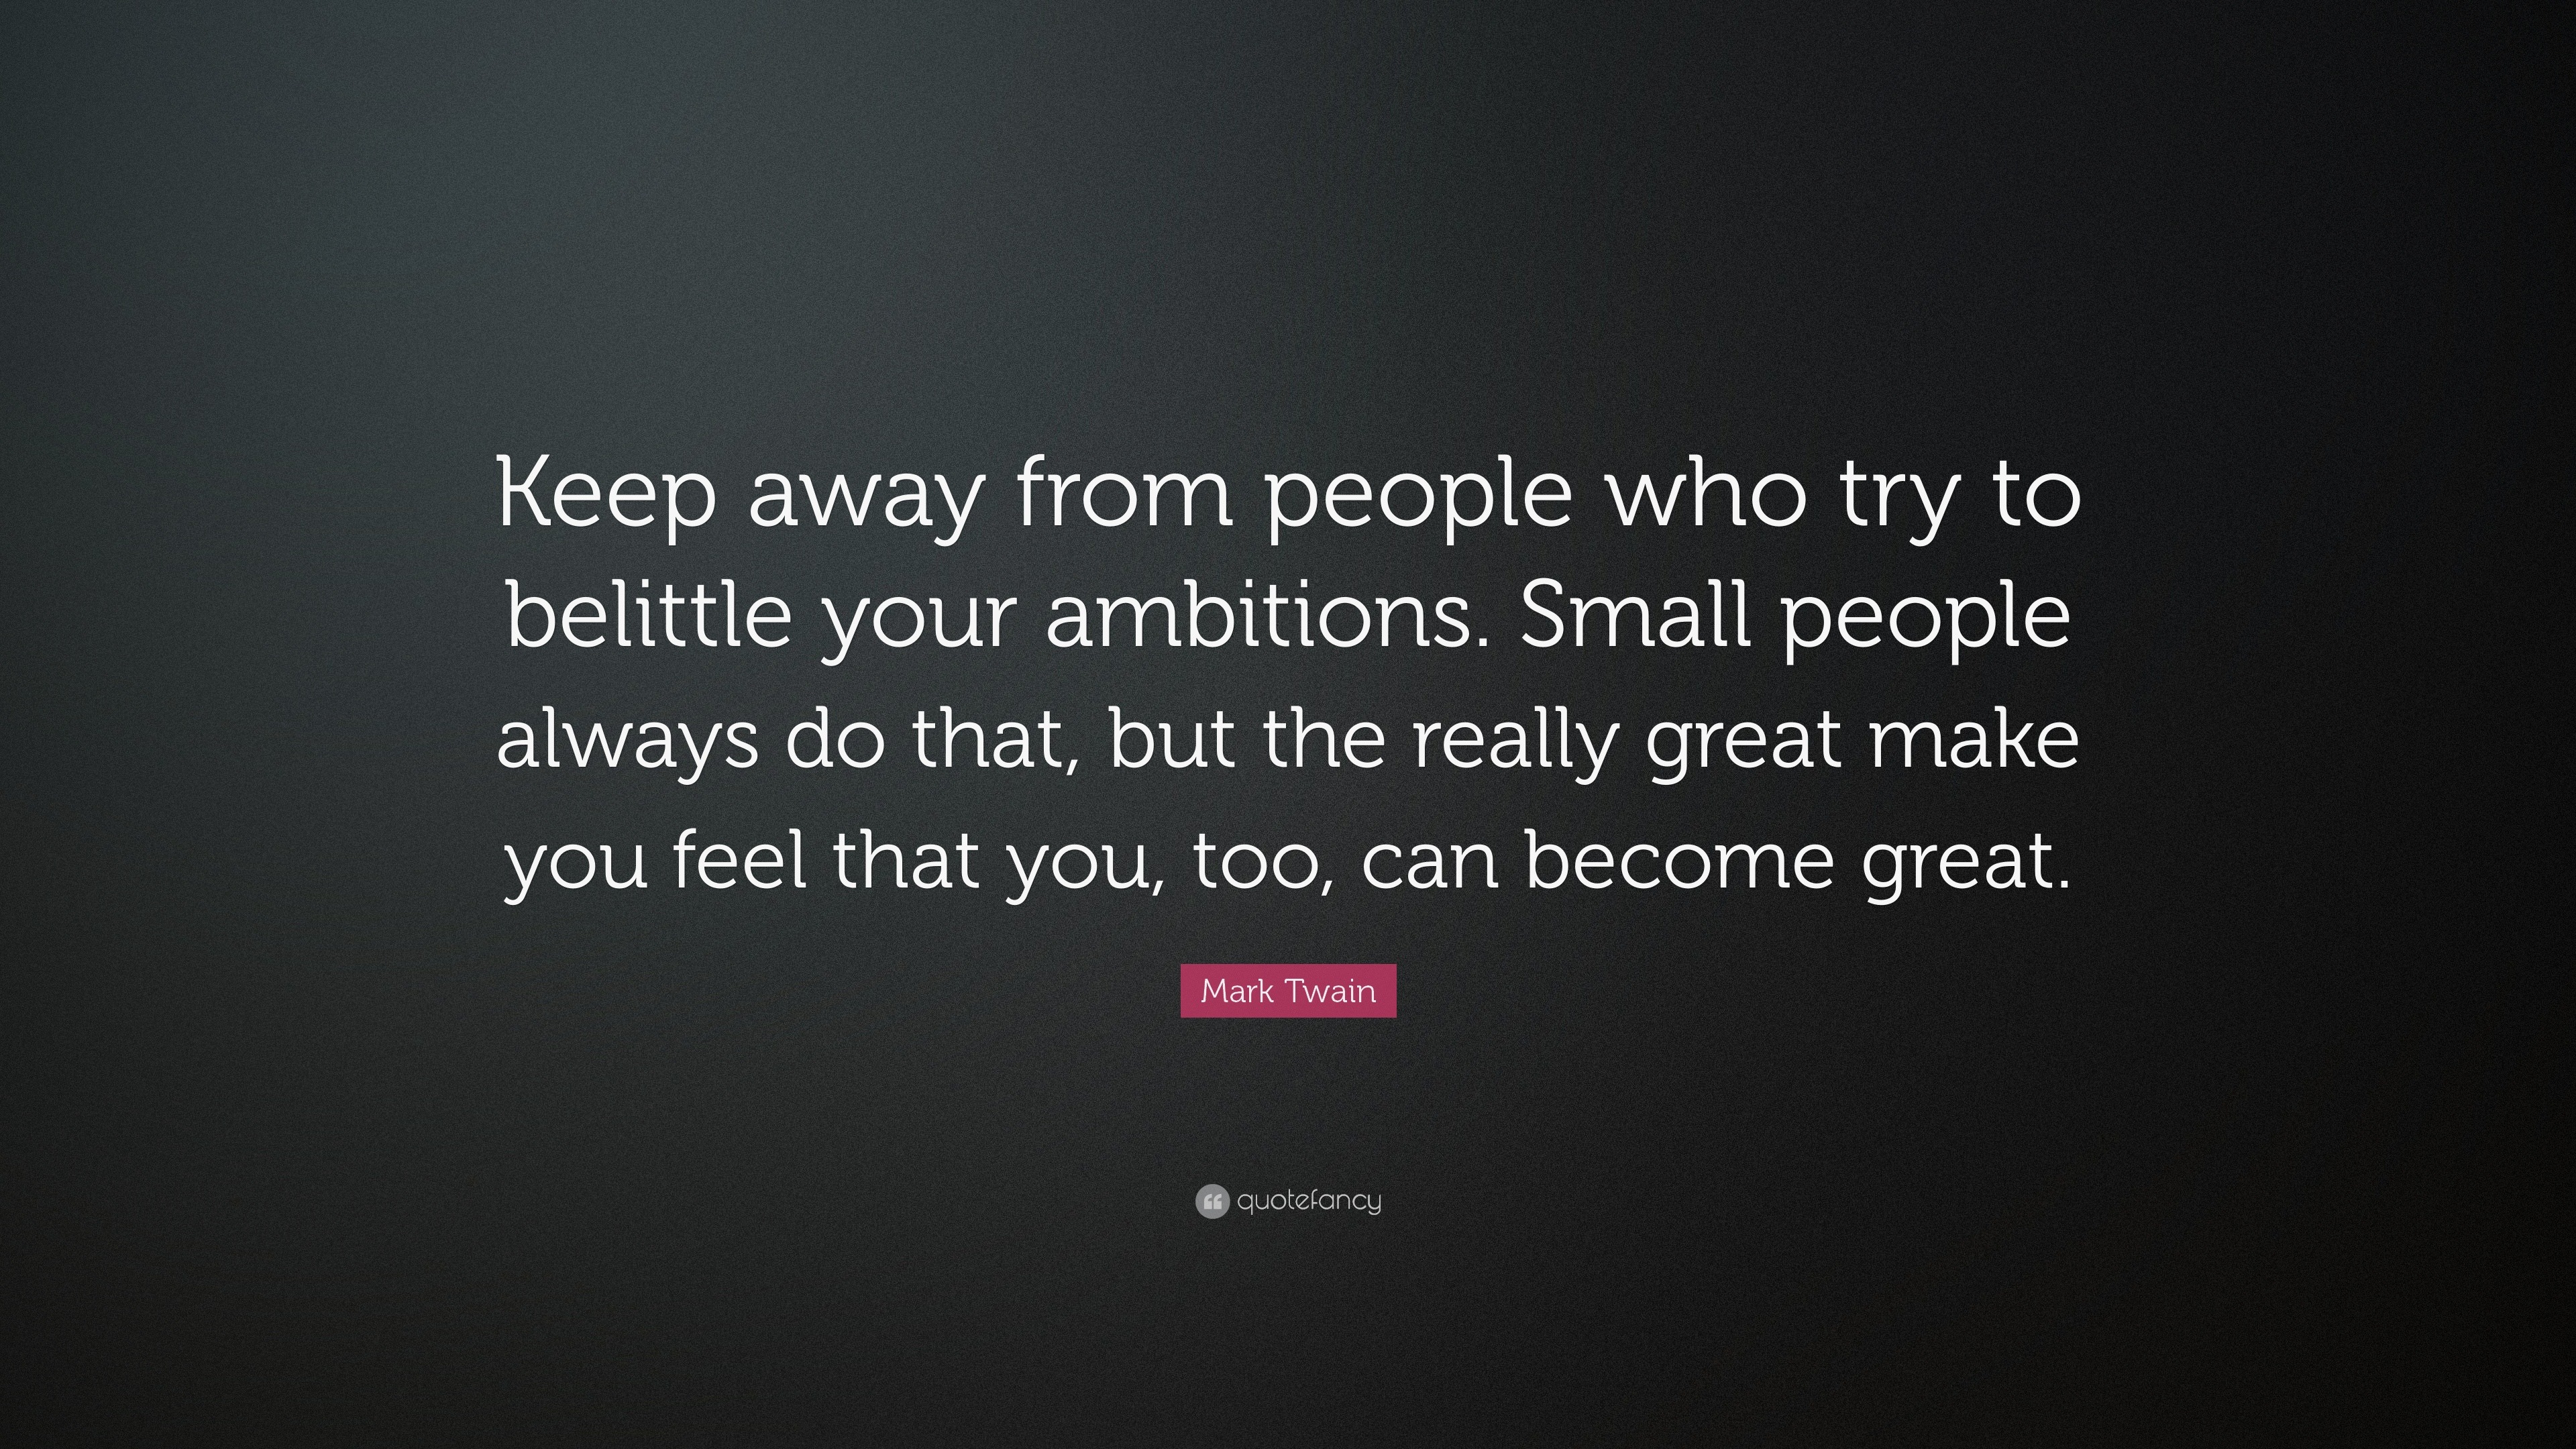 Mark Twain Quote: “Keep away from people who try to belittle your ...